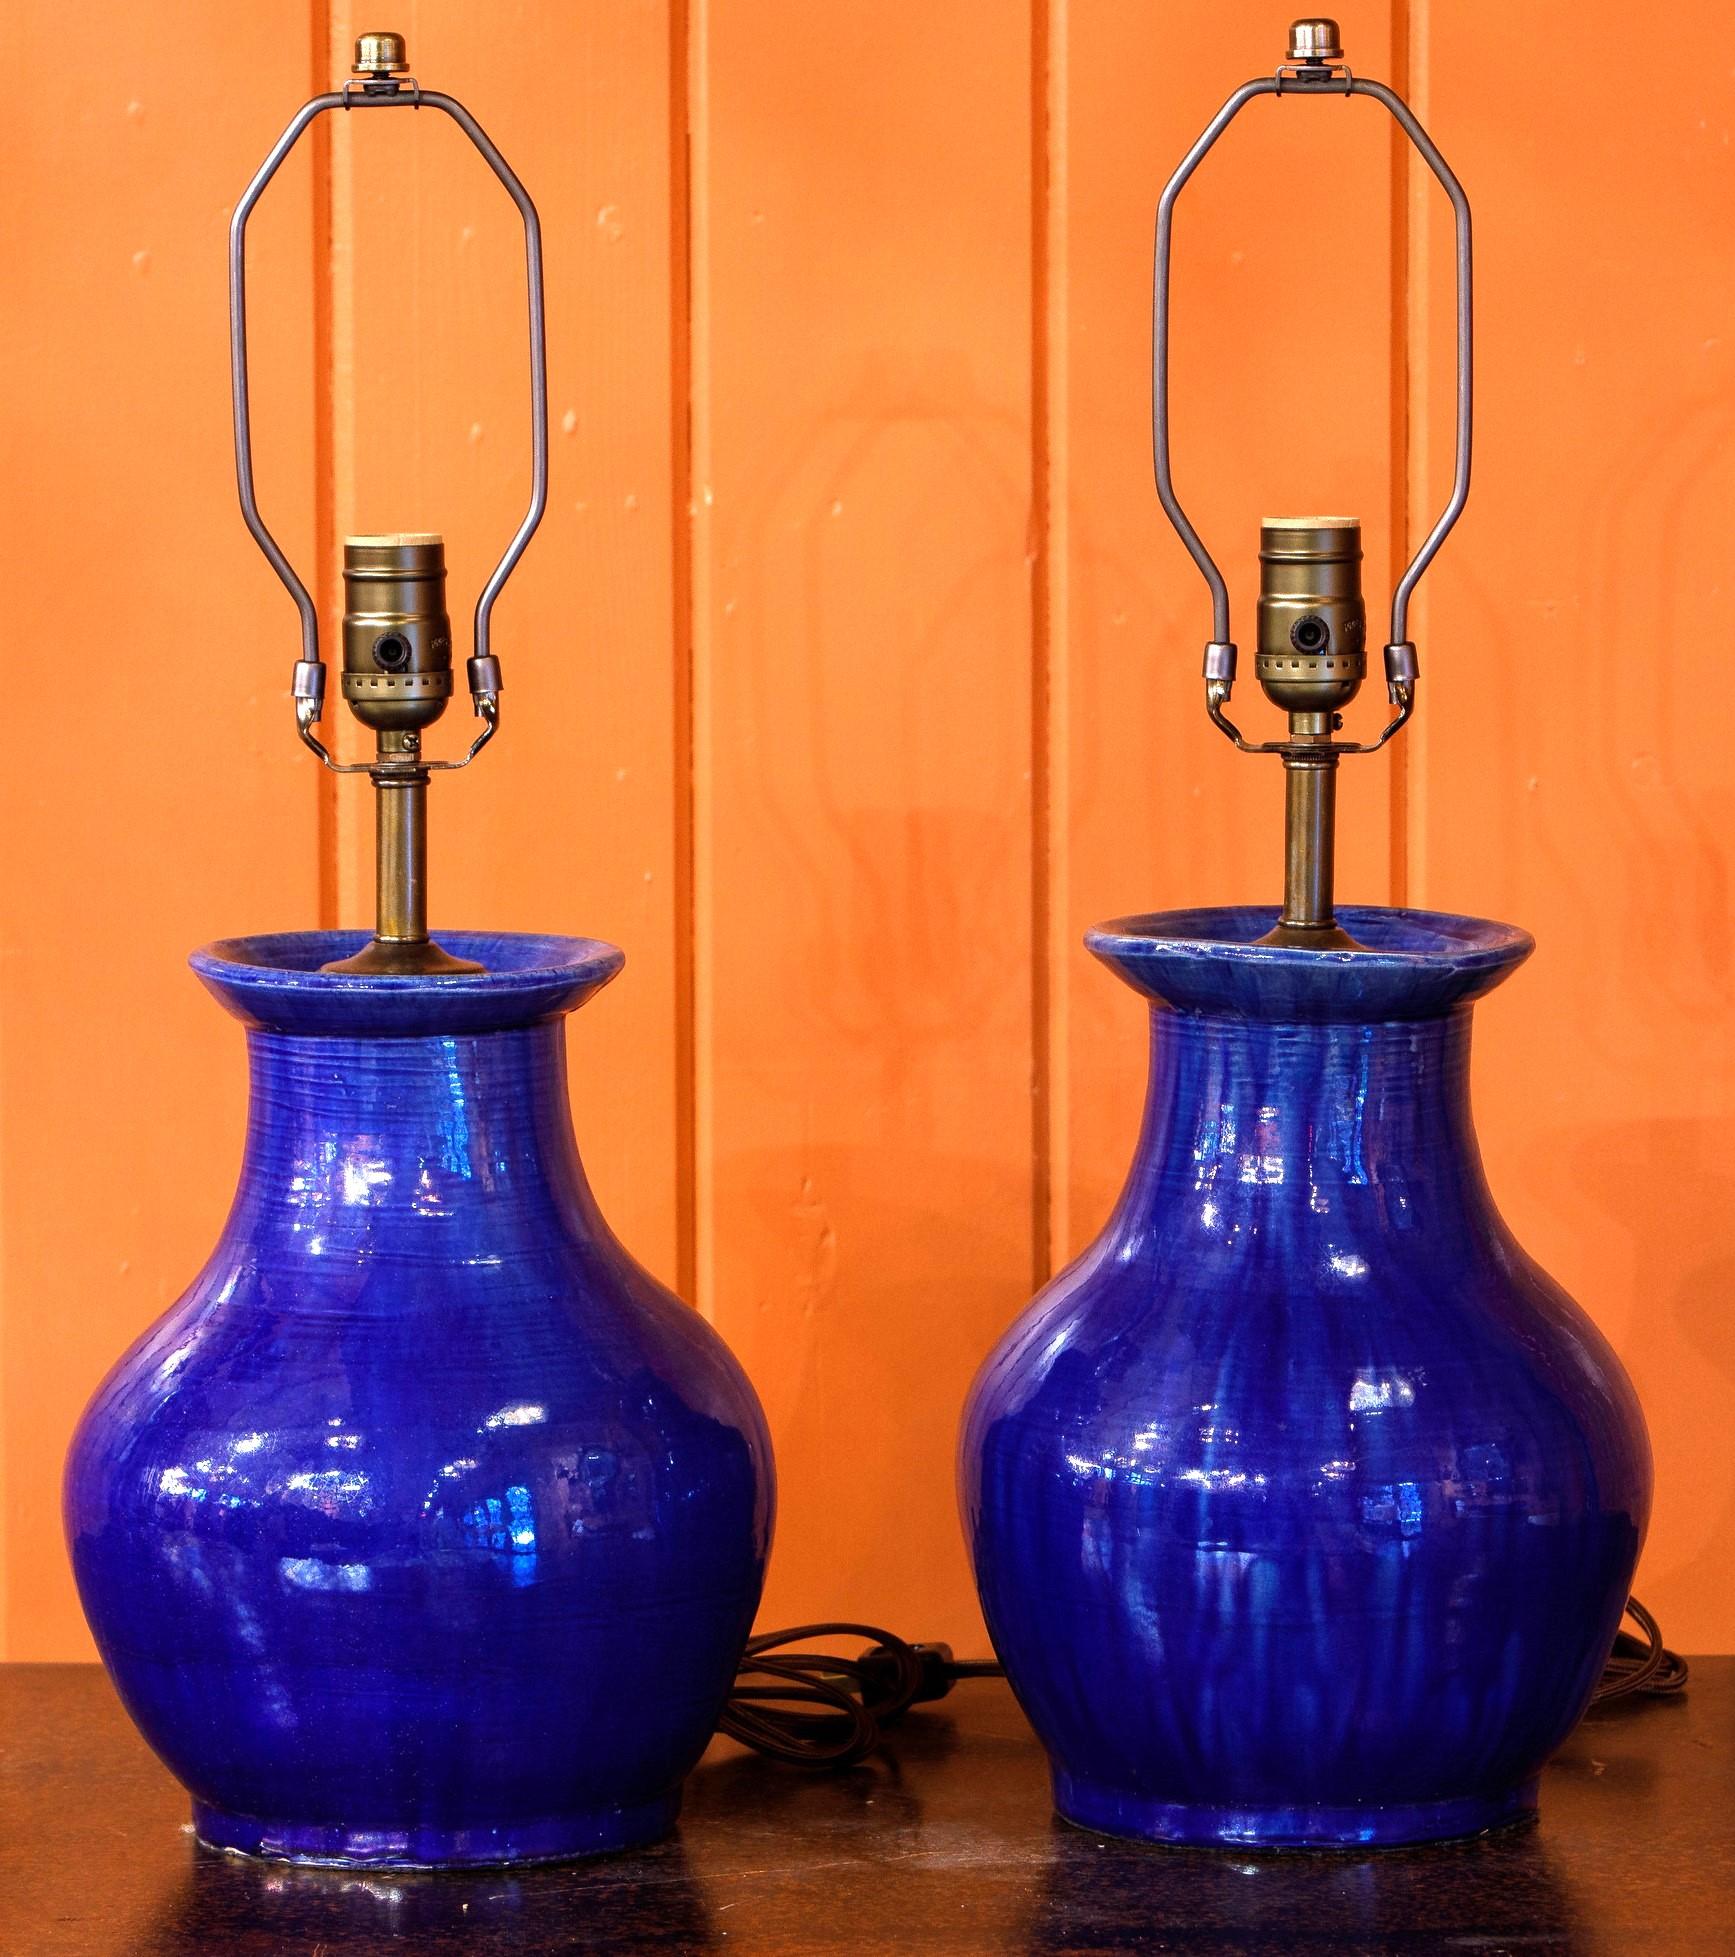 Pair of hand-thrown, hand-painted, cobalt glazed stoneware lamp. Newly wired with all UL listed parts. Versatile, minimalist style that would complement almost any style. Measurement is to the top of socket. 